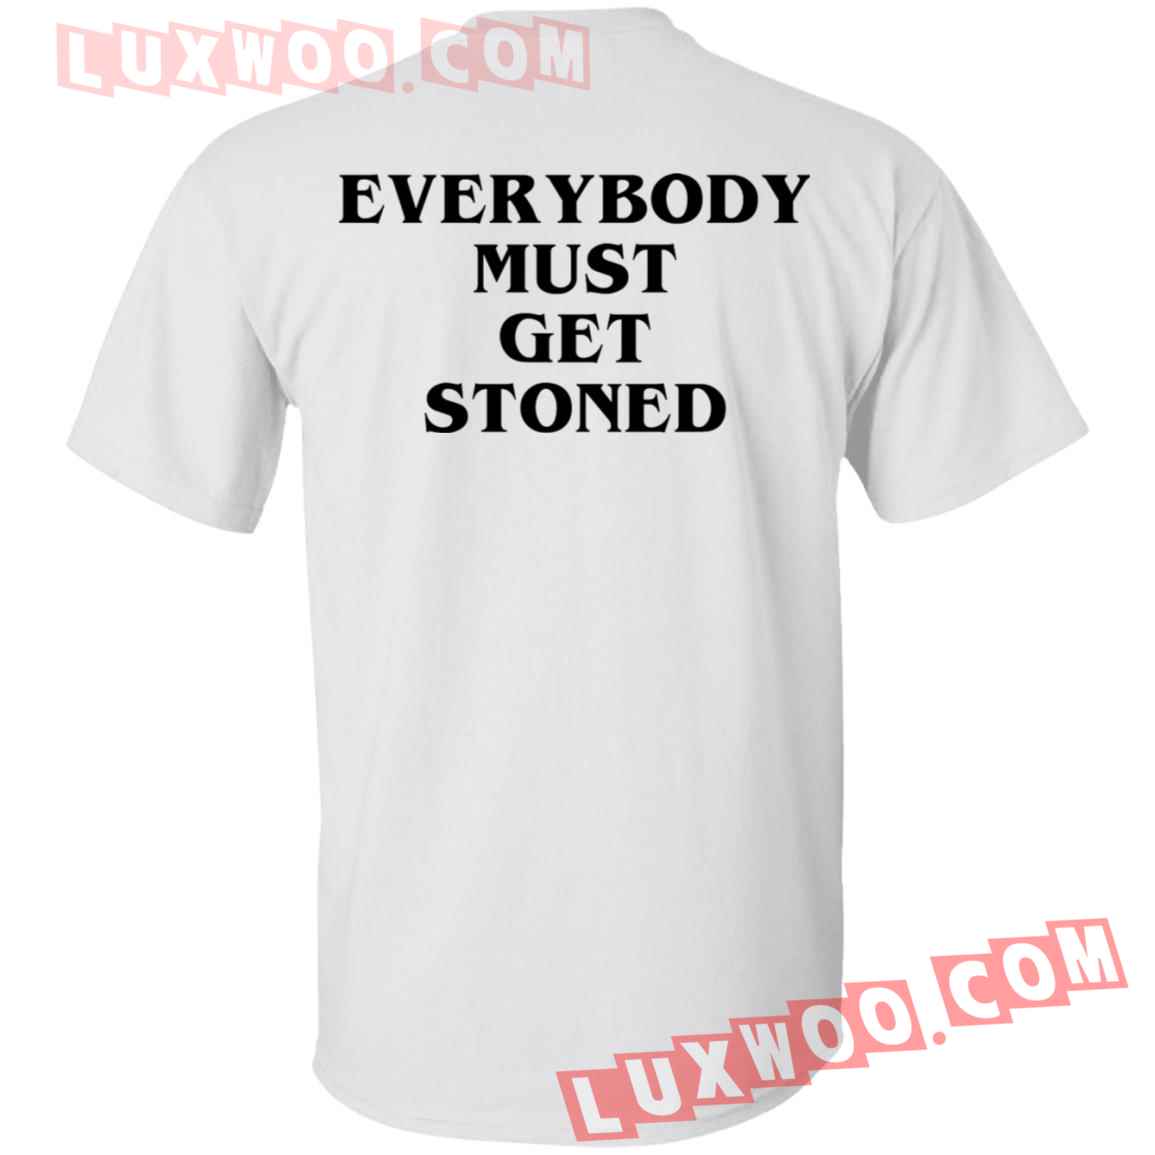 Everybody Must Get Stoned Shirt